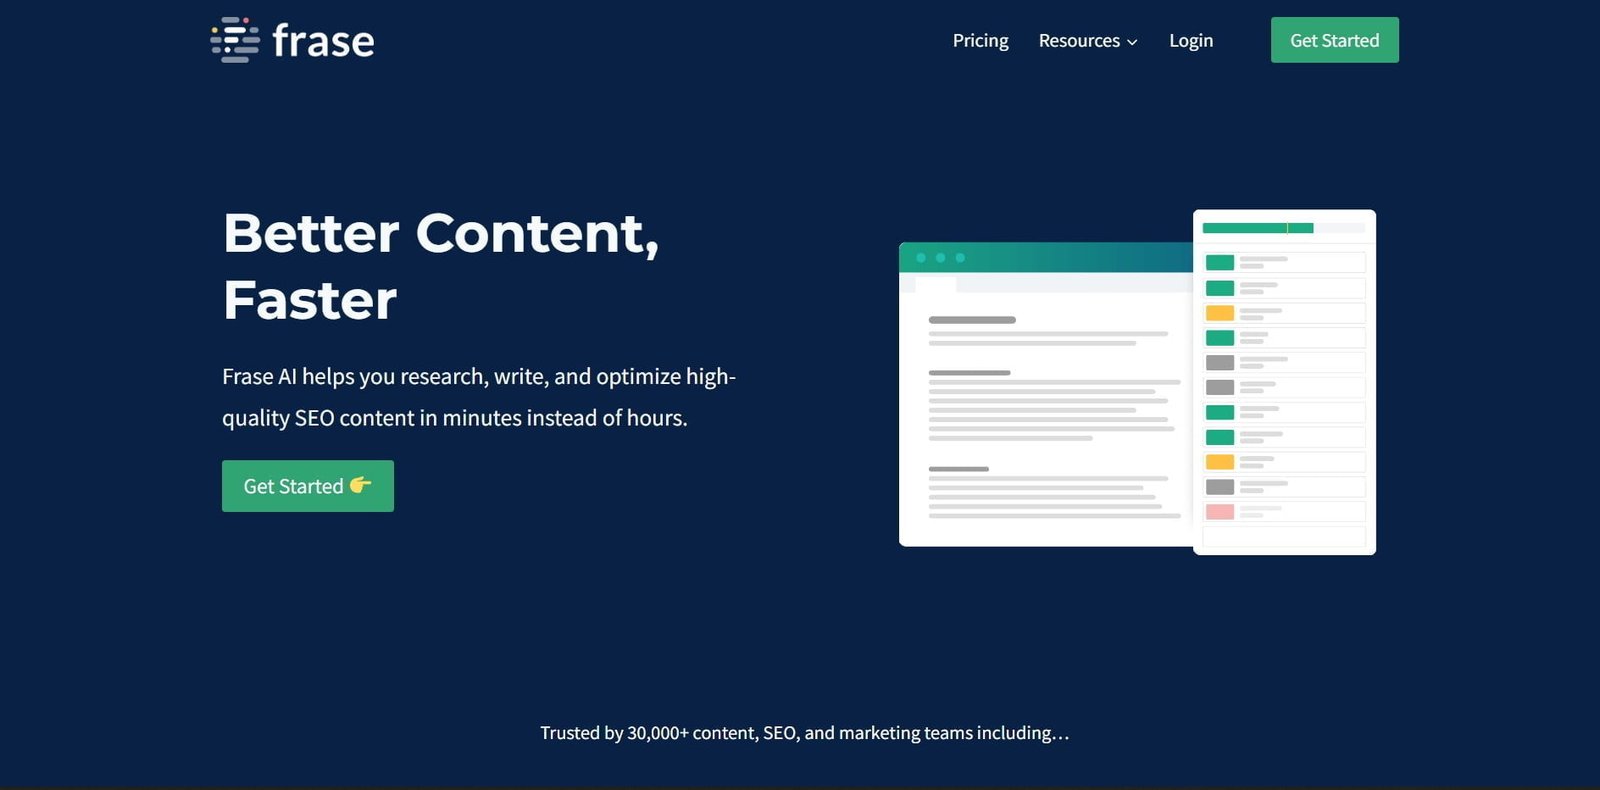 Fraise is an AI writing tool designed to help users research